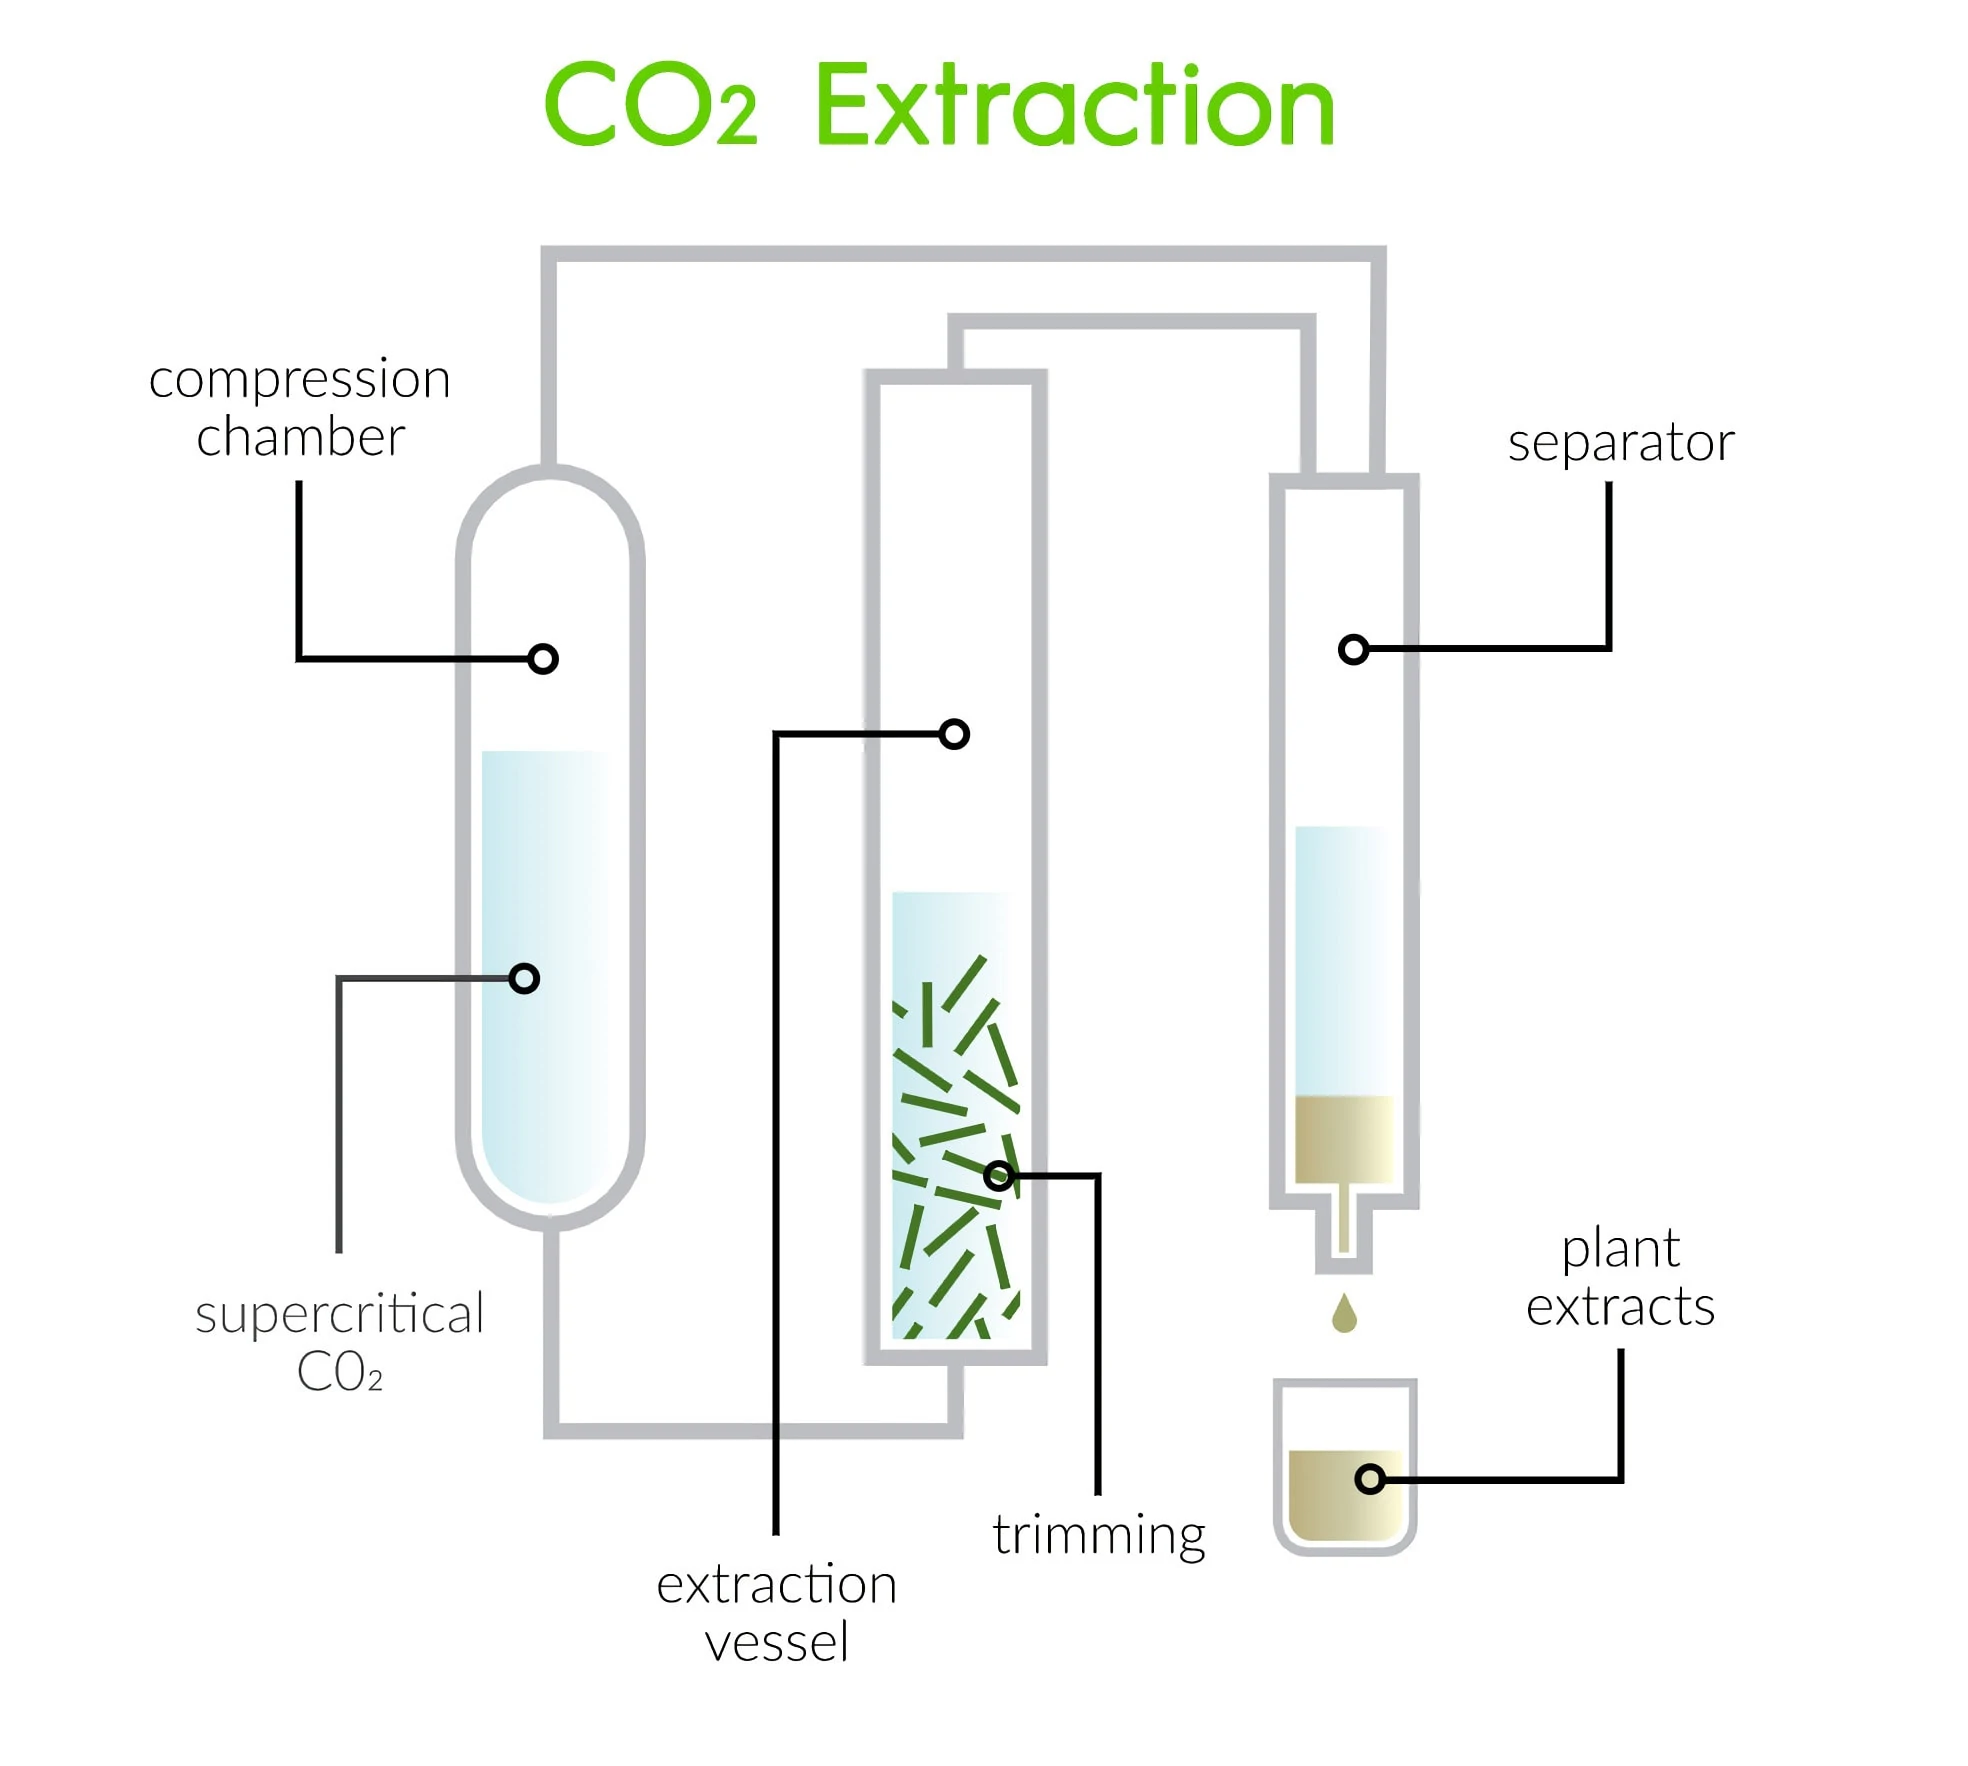 The supercritical CO2 extraction process